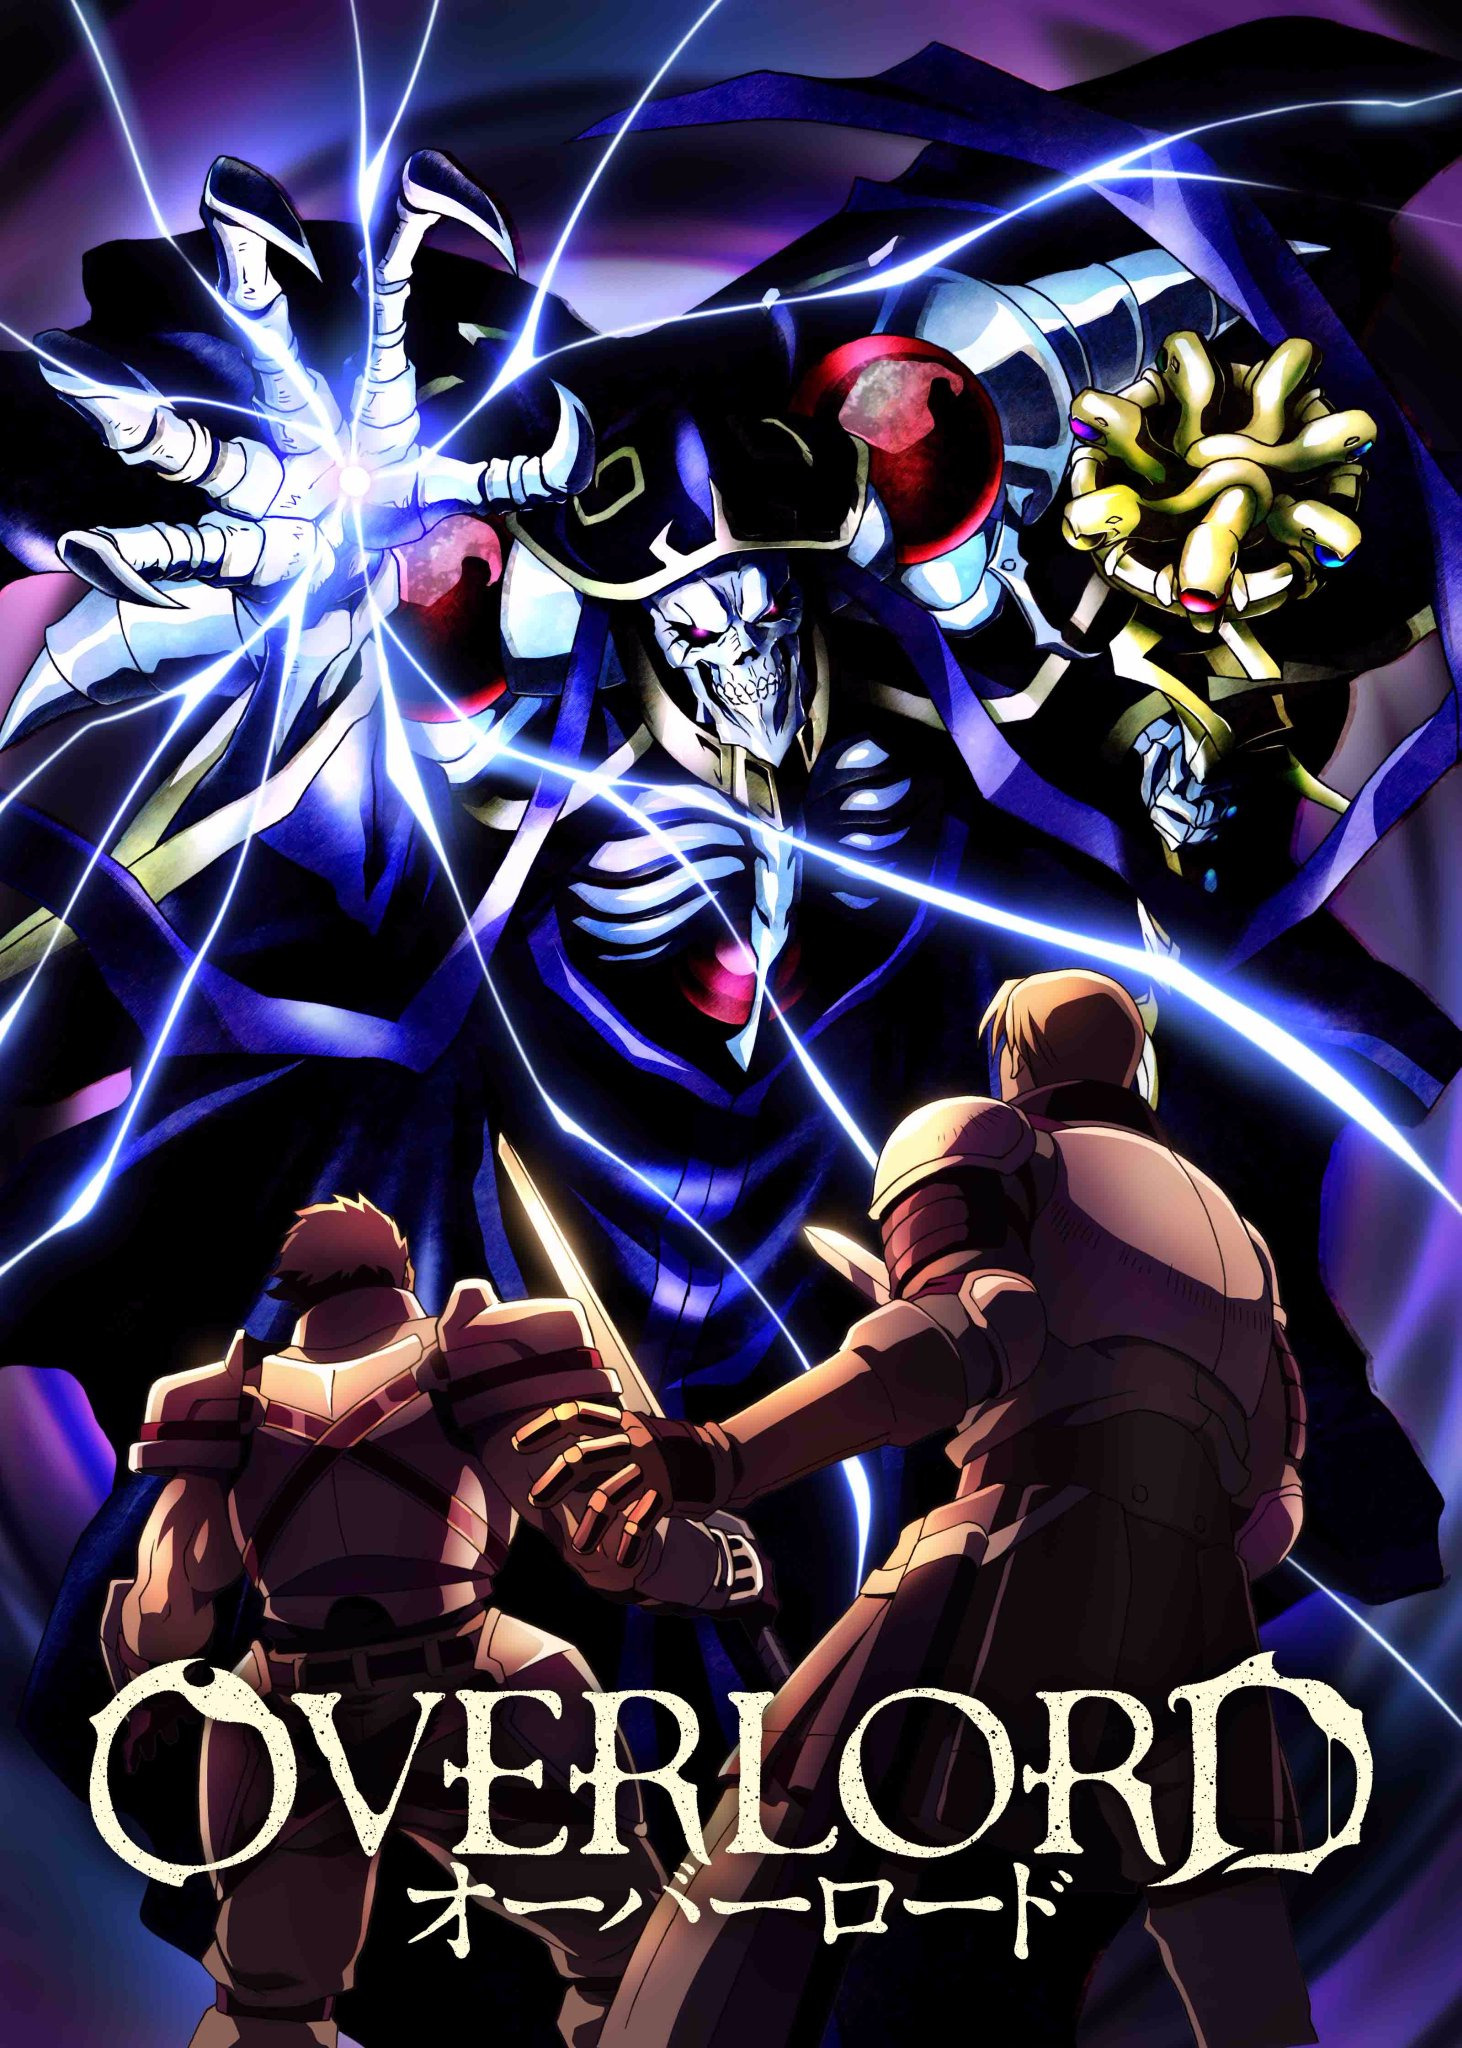 New compilation movie announced for 'Overlord' anime - Far East Films